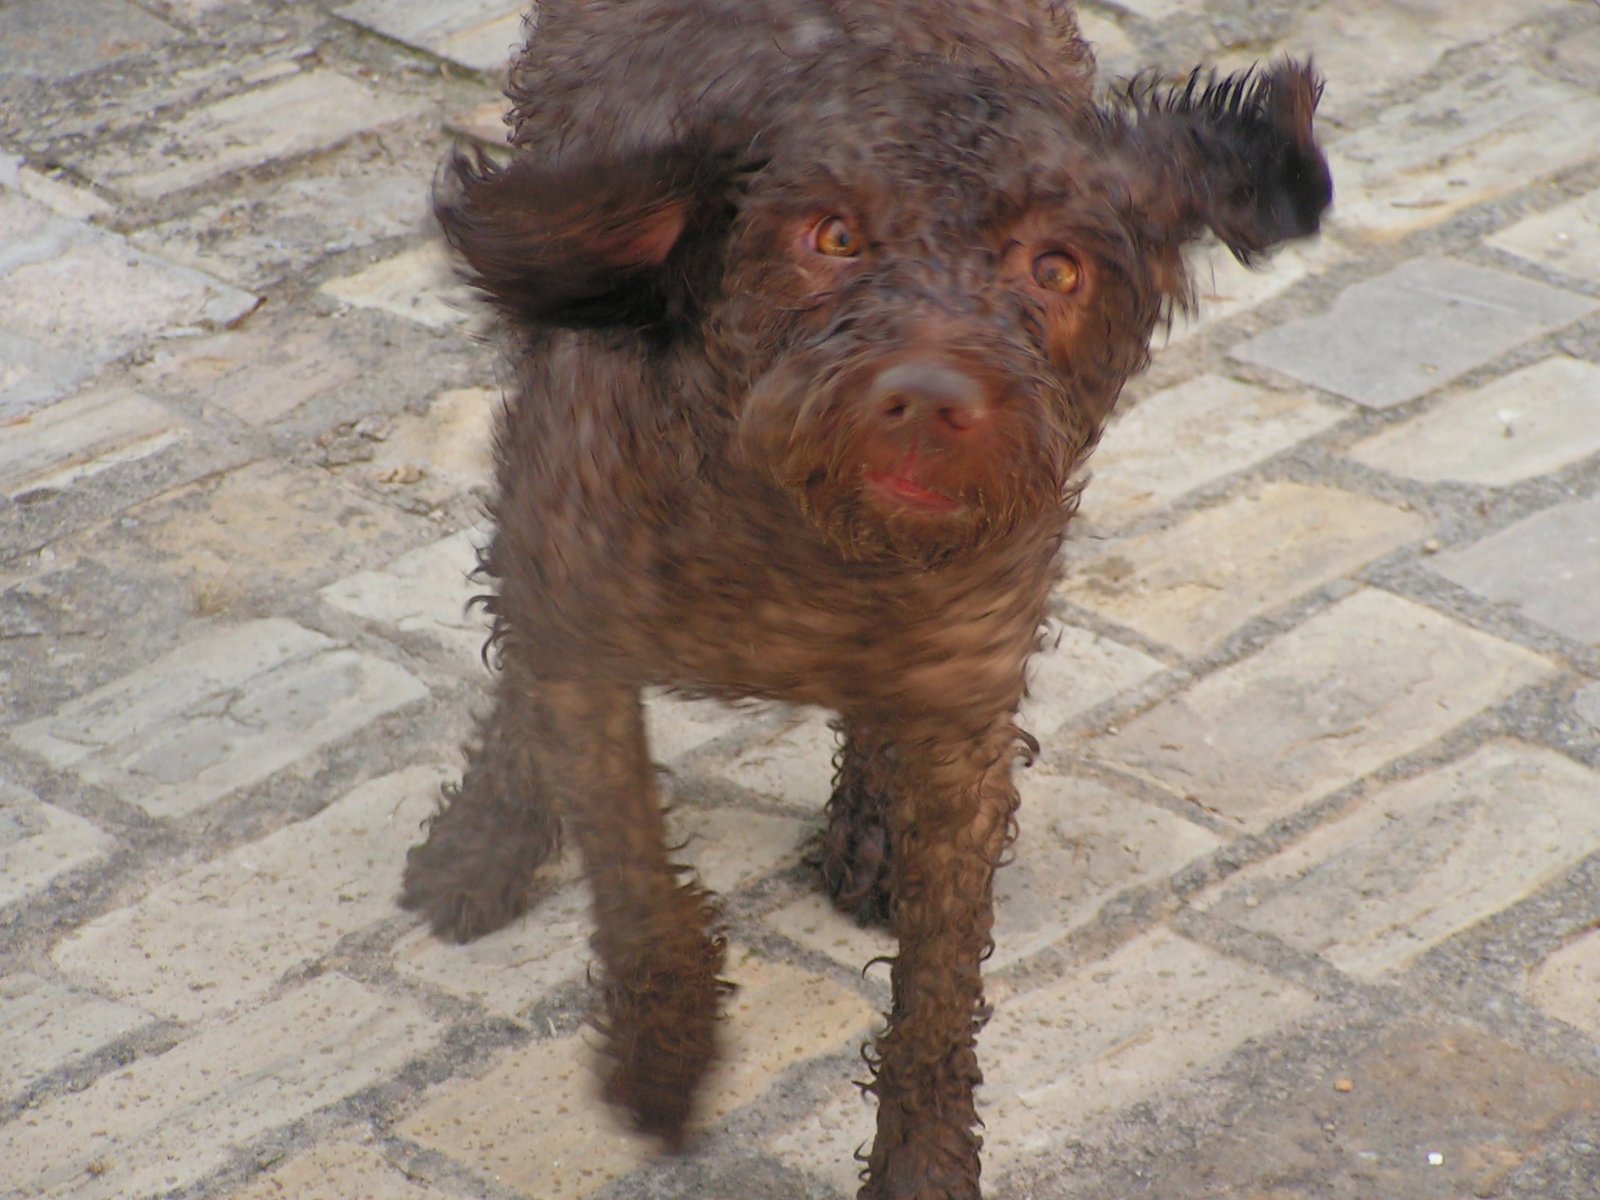 small wet dog standing on brick surface and looking directly at camera